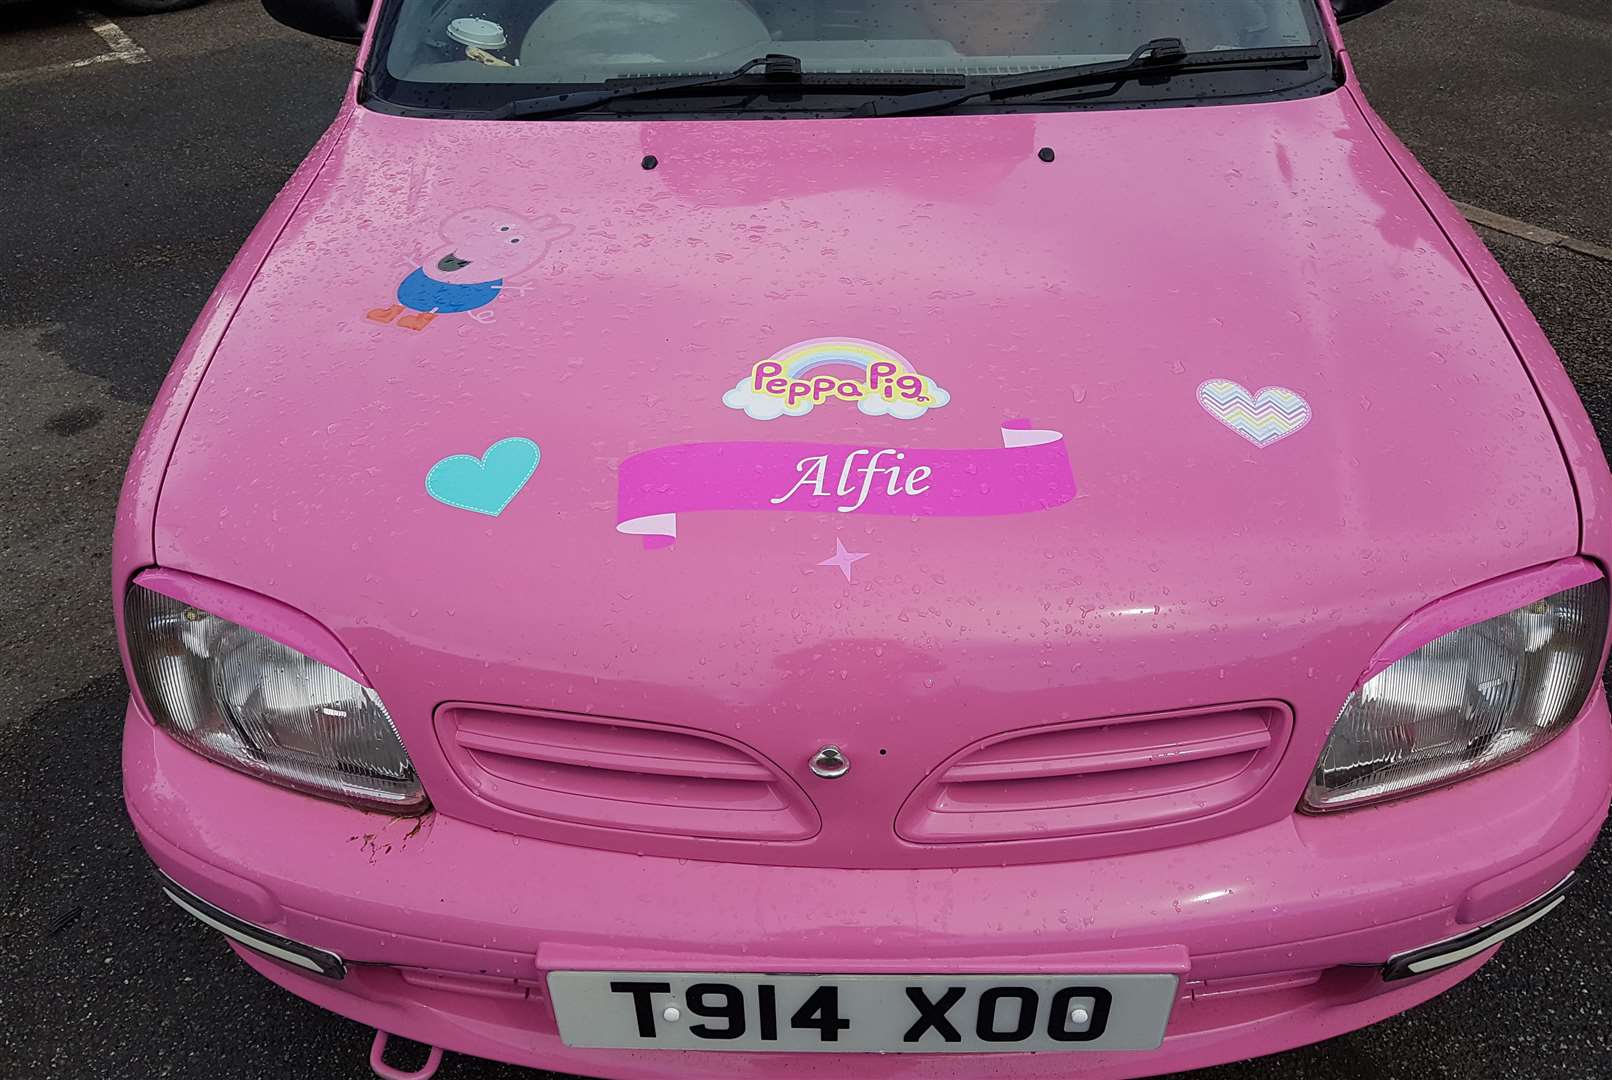 The car has been transformed pink inspired by Peppa Pig